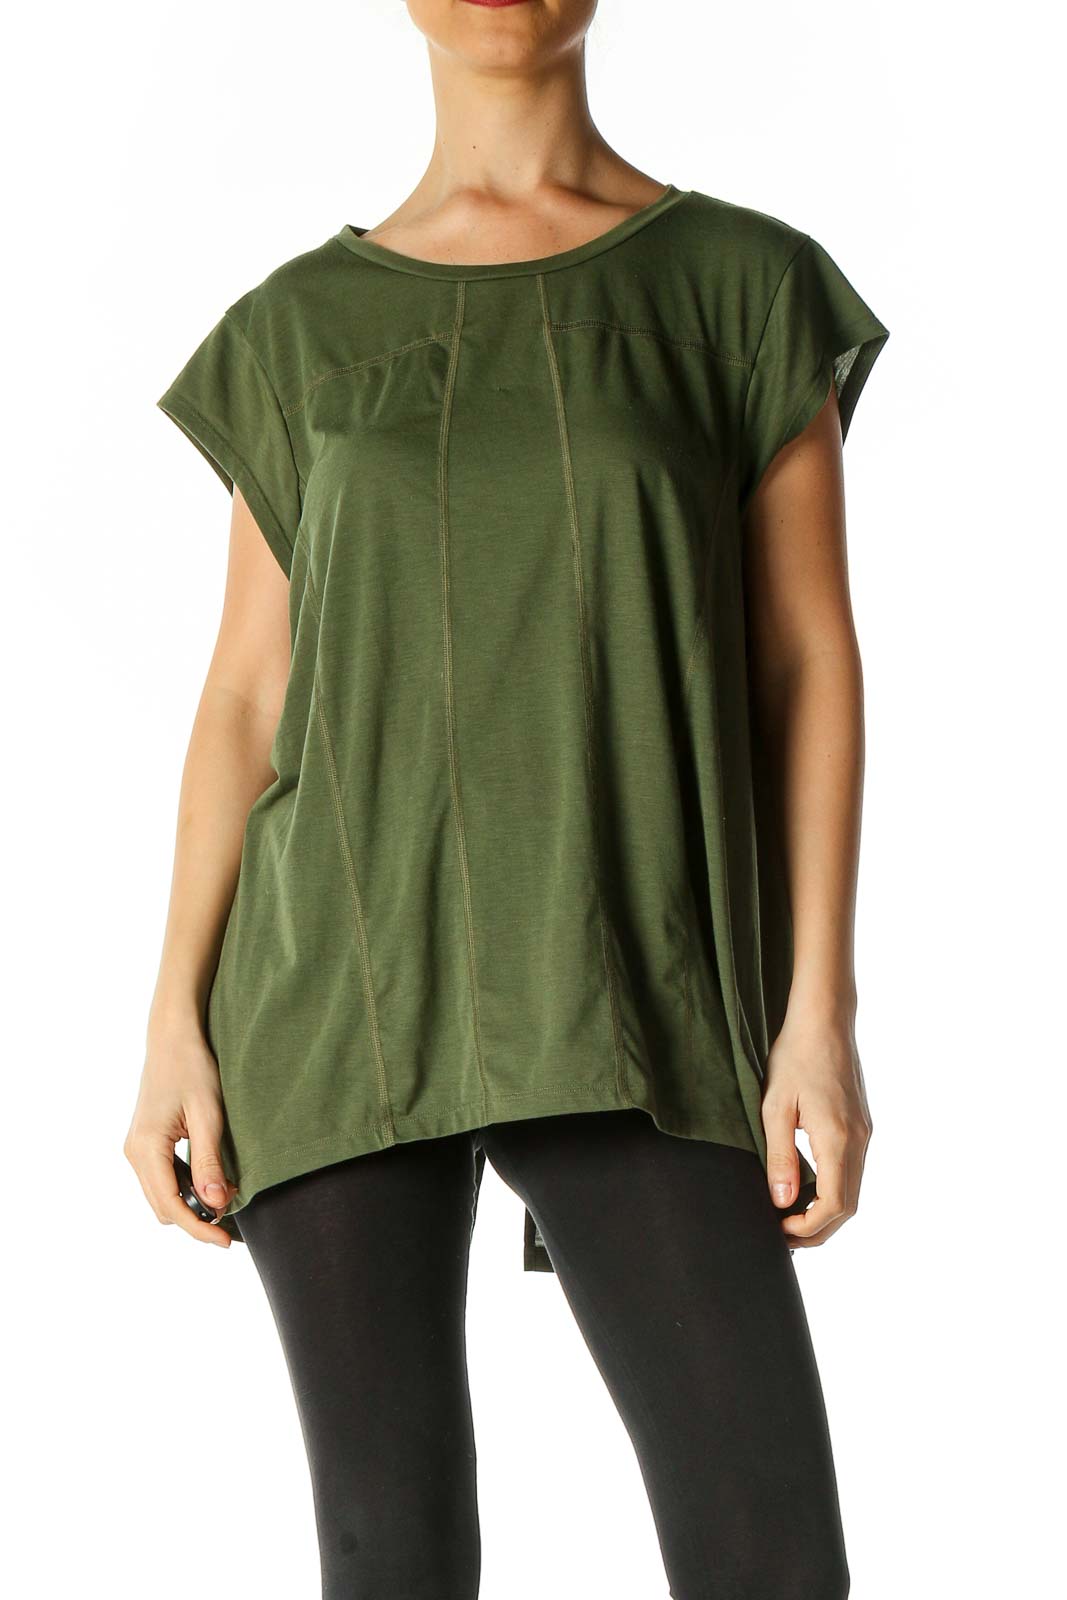 Green Solid Activewear Blouse Front